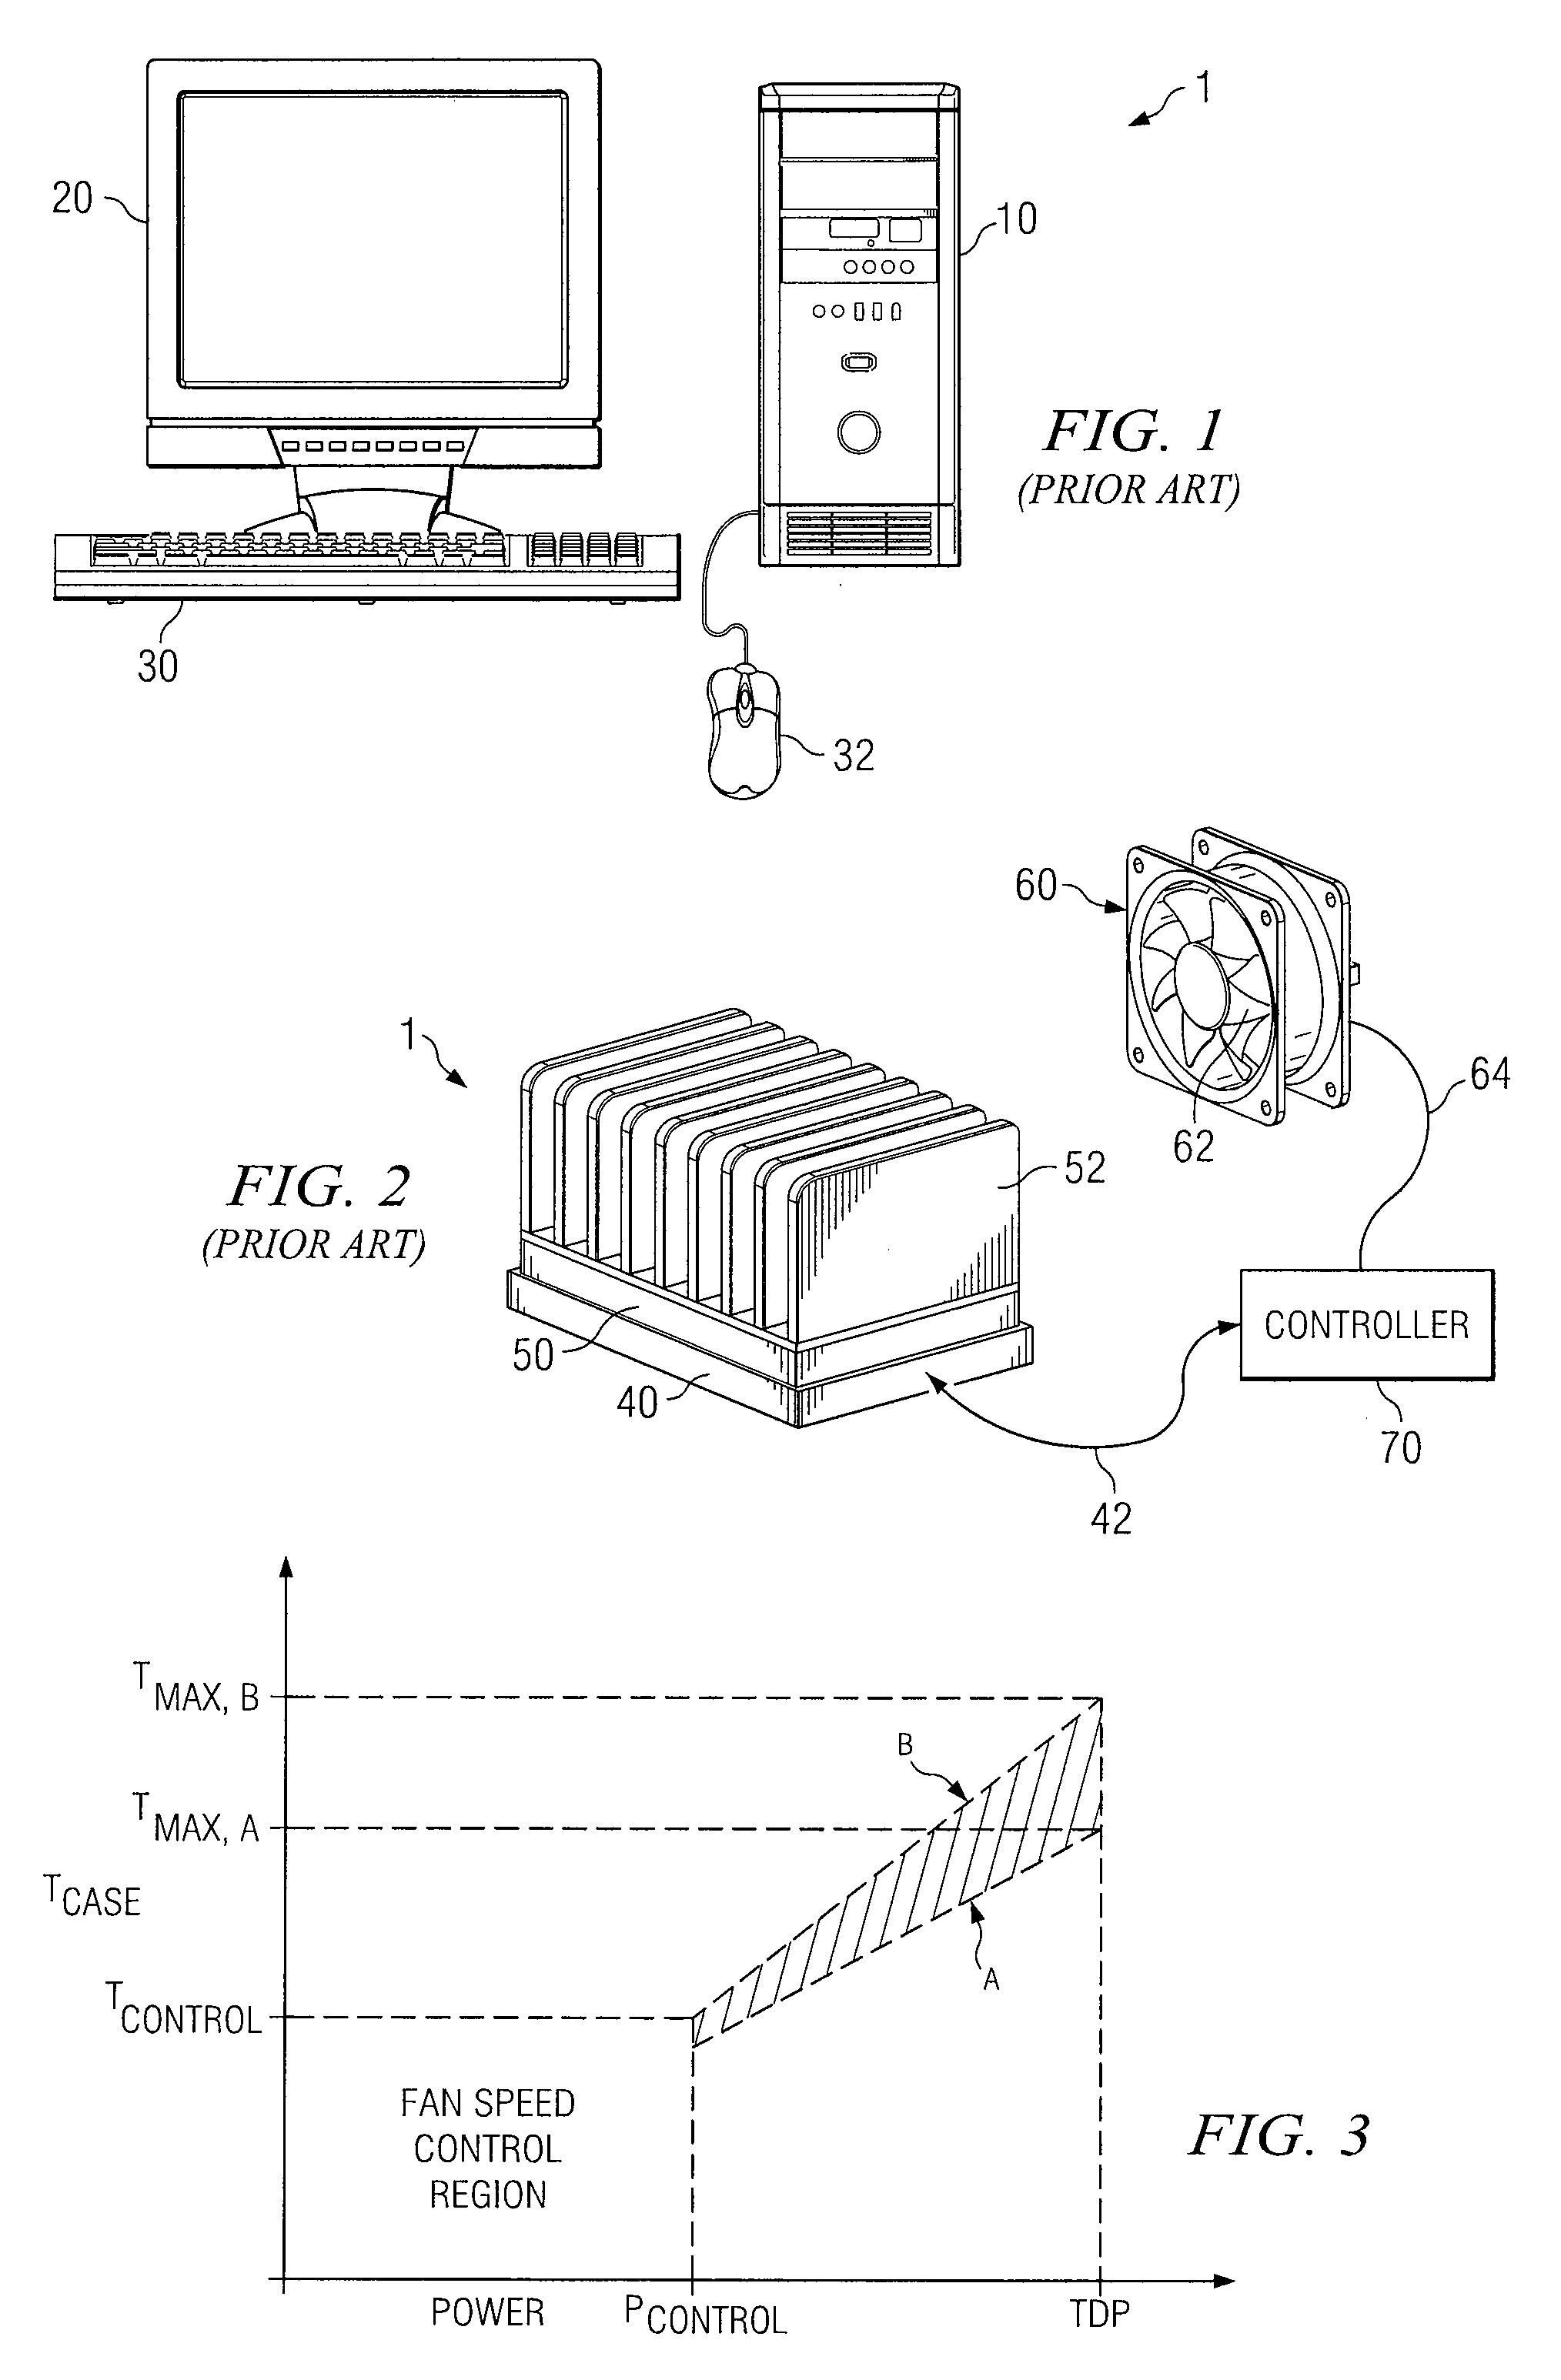 Method and System for Managing the Power Consumption of an Information Handling System